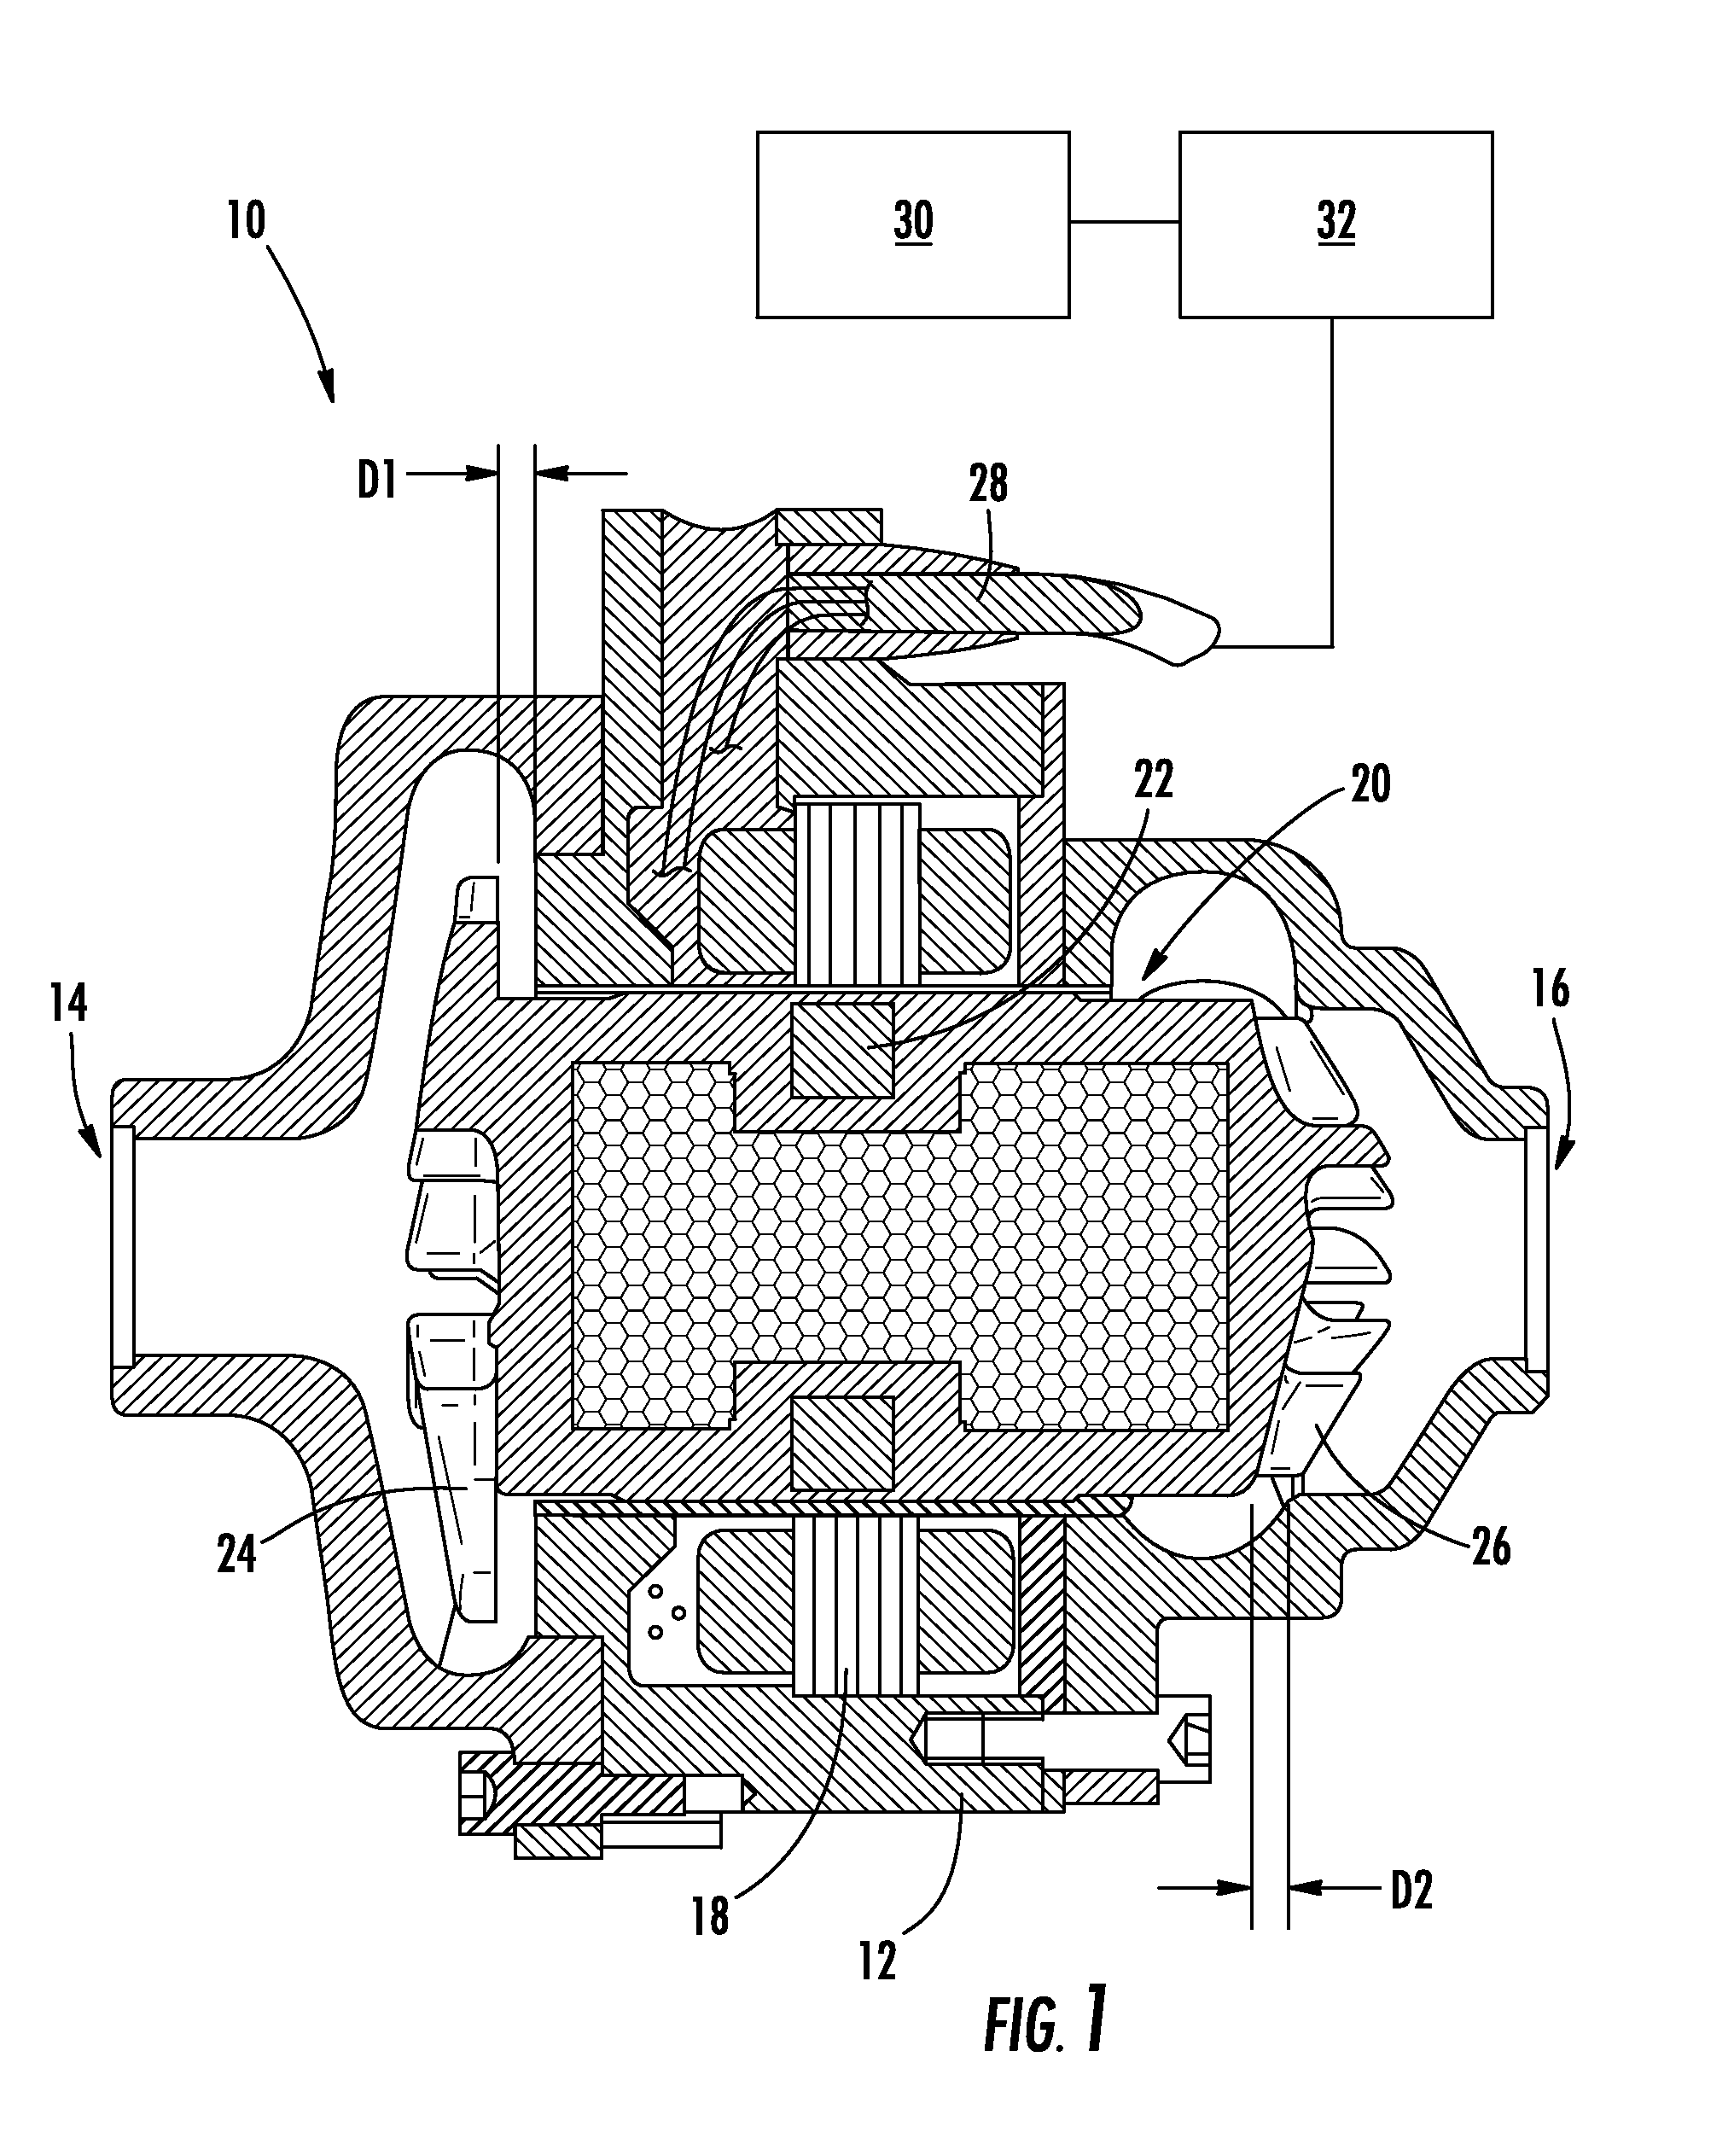 Method for physiologic control of a continuous flow total artificial heart